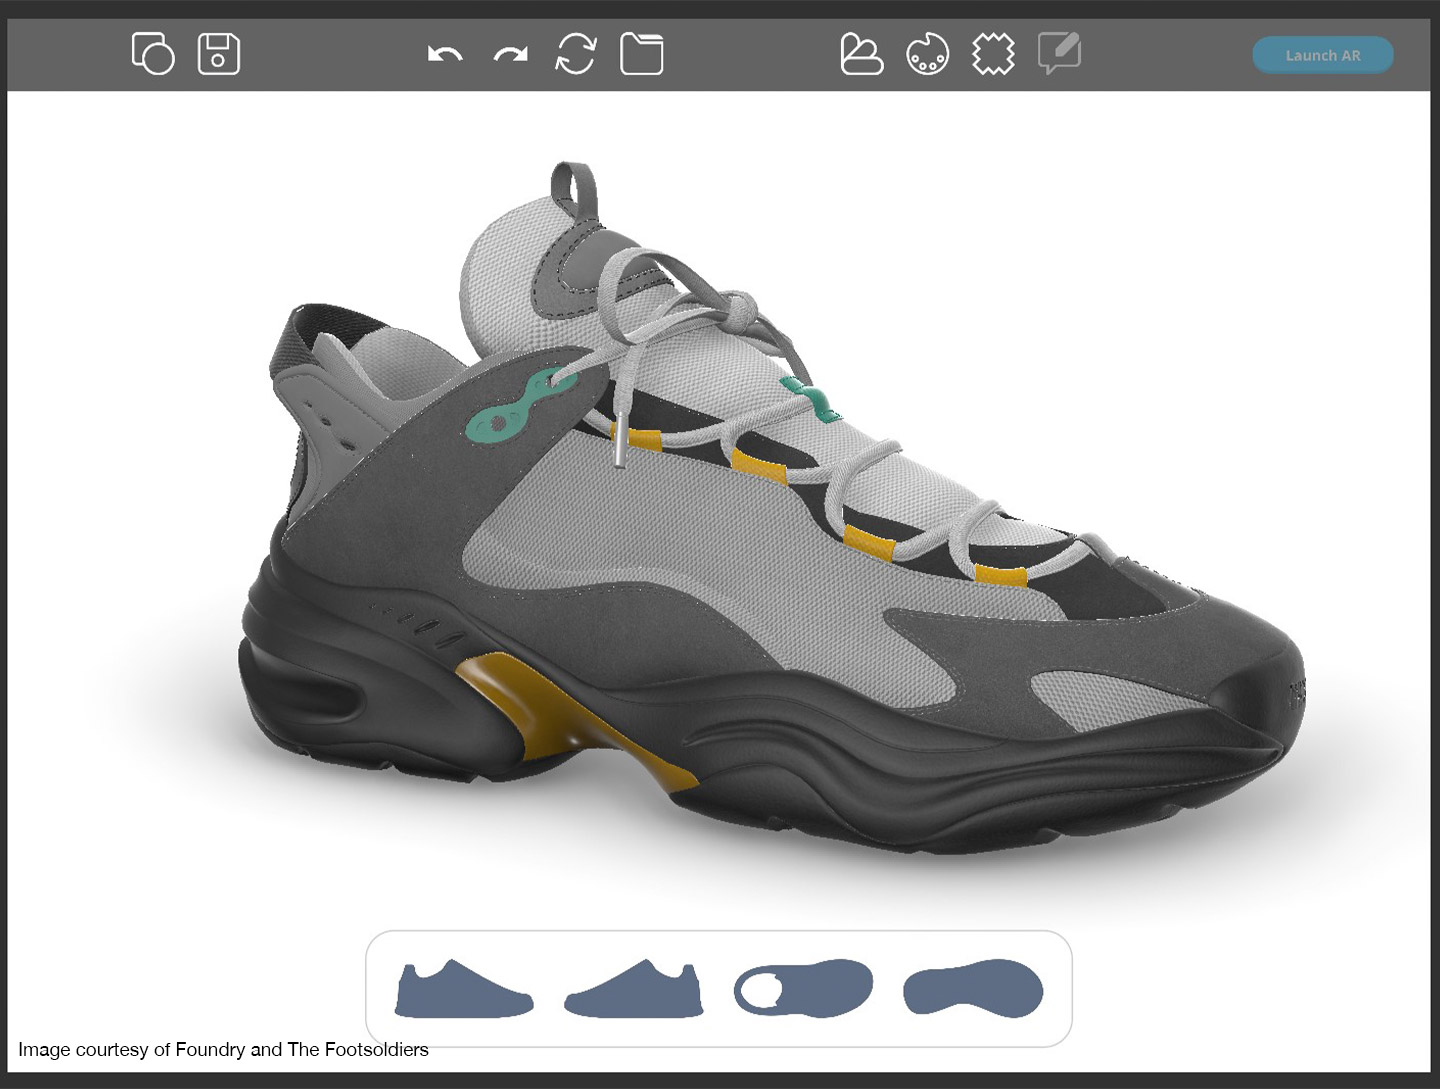 Front view of 3D shoe in Colorway